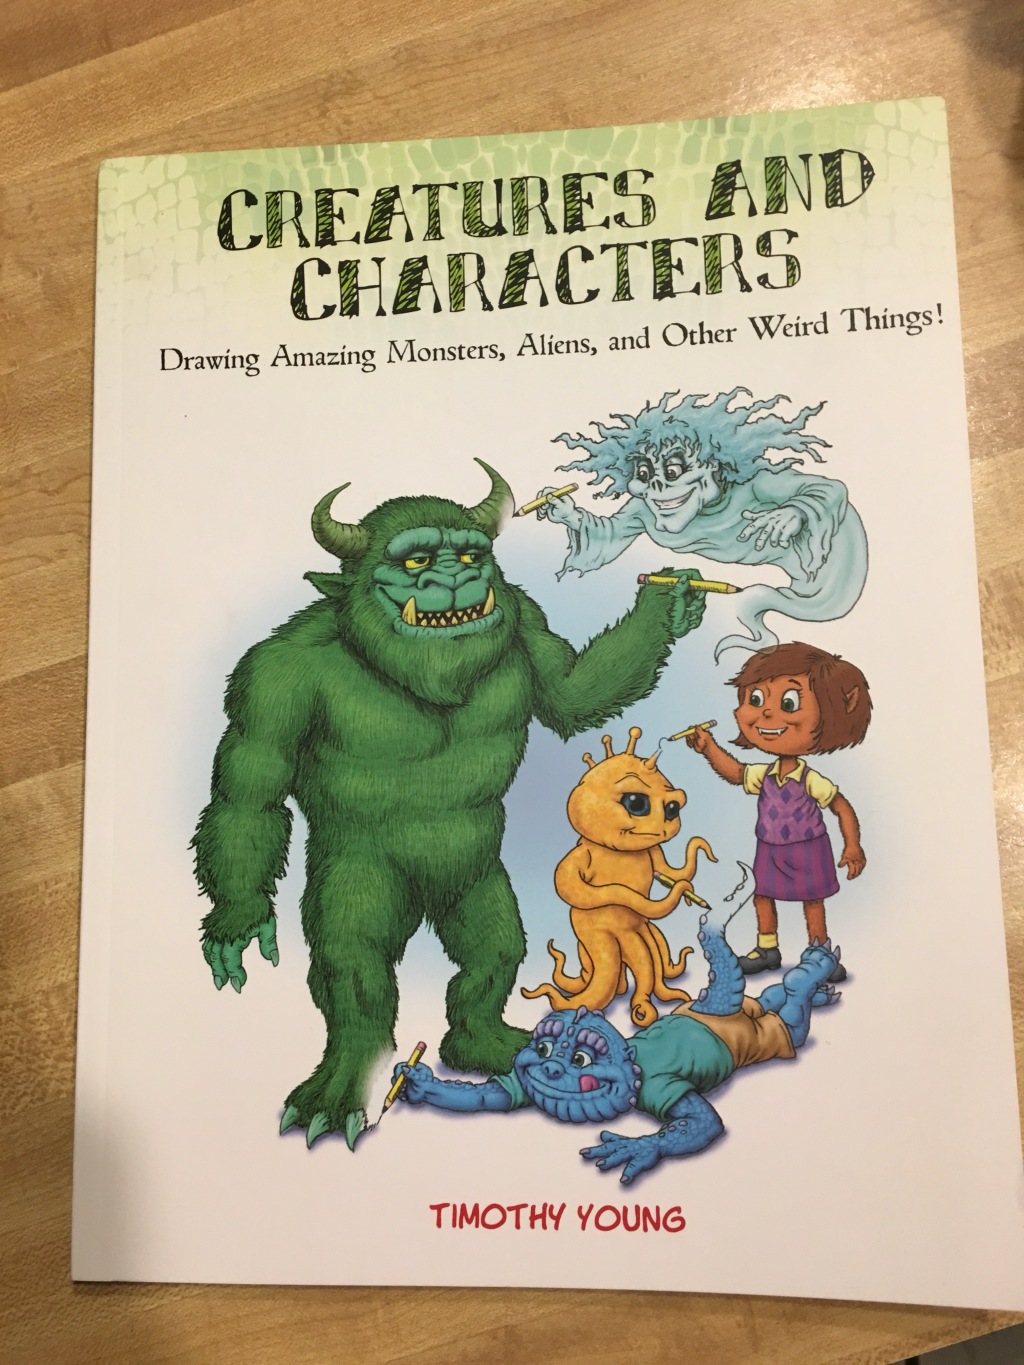 Creatures and Characters